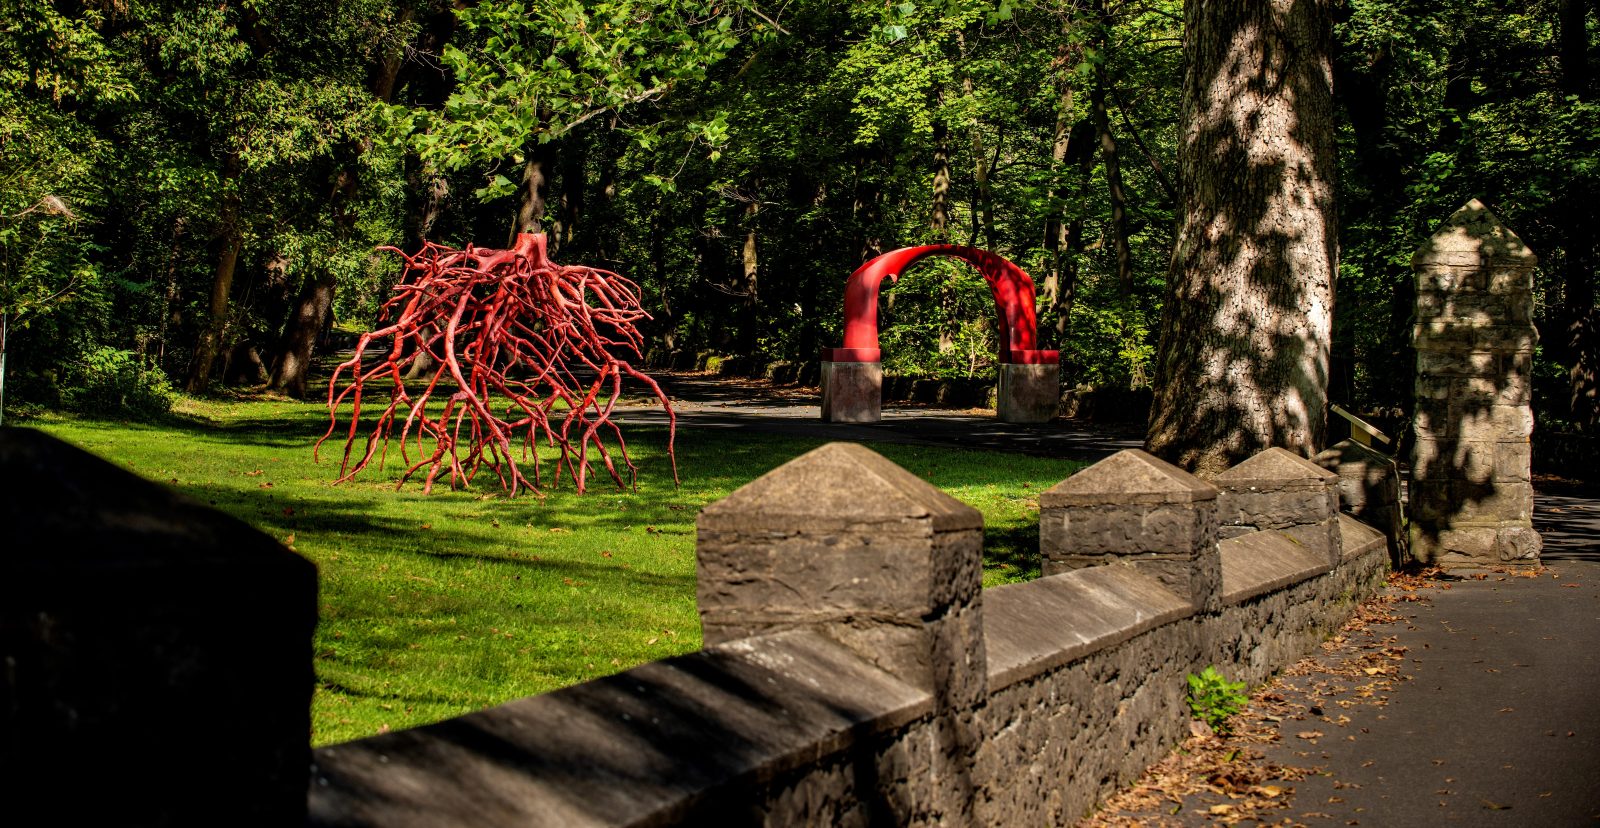 The Late Bronze Root red sculpture by Steve Tobin and the red Untitled arch sculpture by Karl Stirner on the Karl Stirner Arts Trail in Easton, Pennsylvania